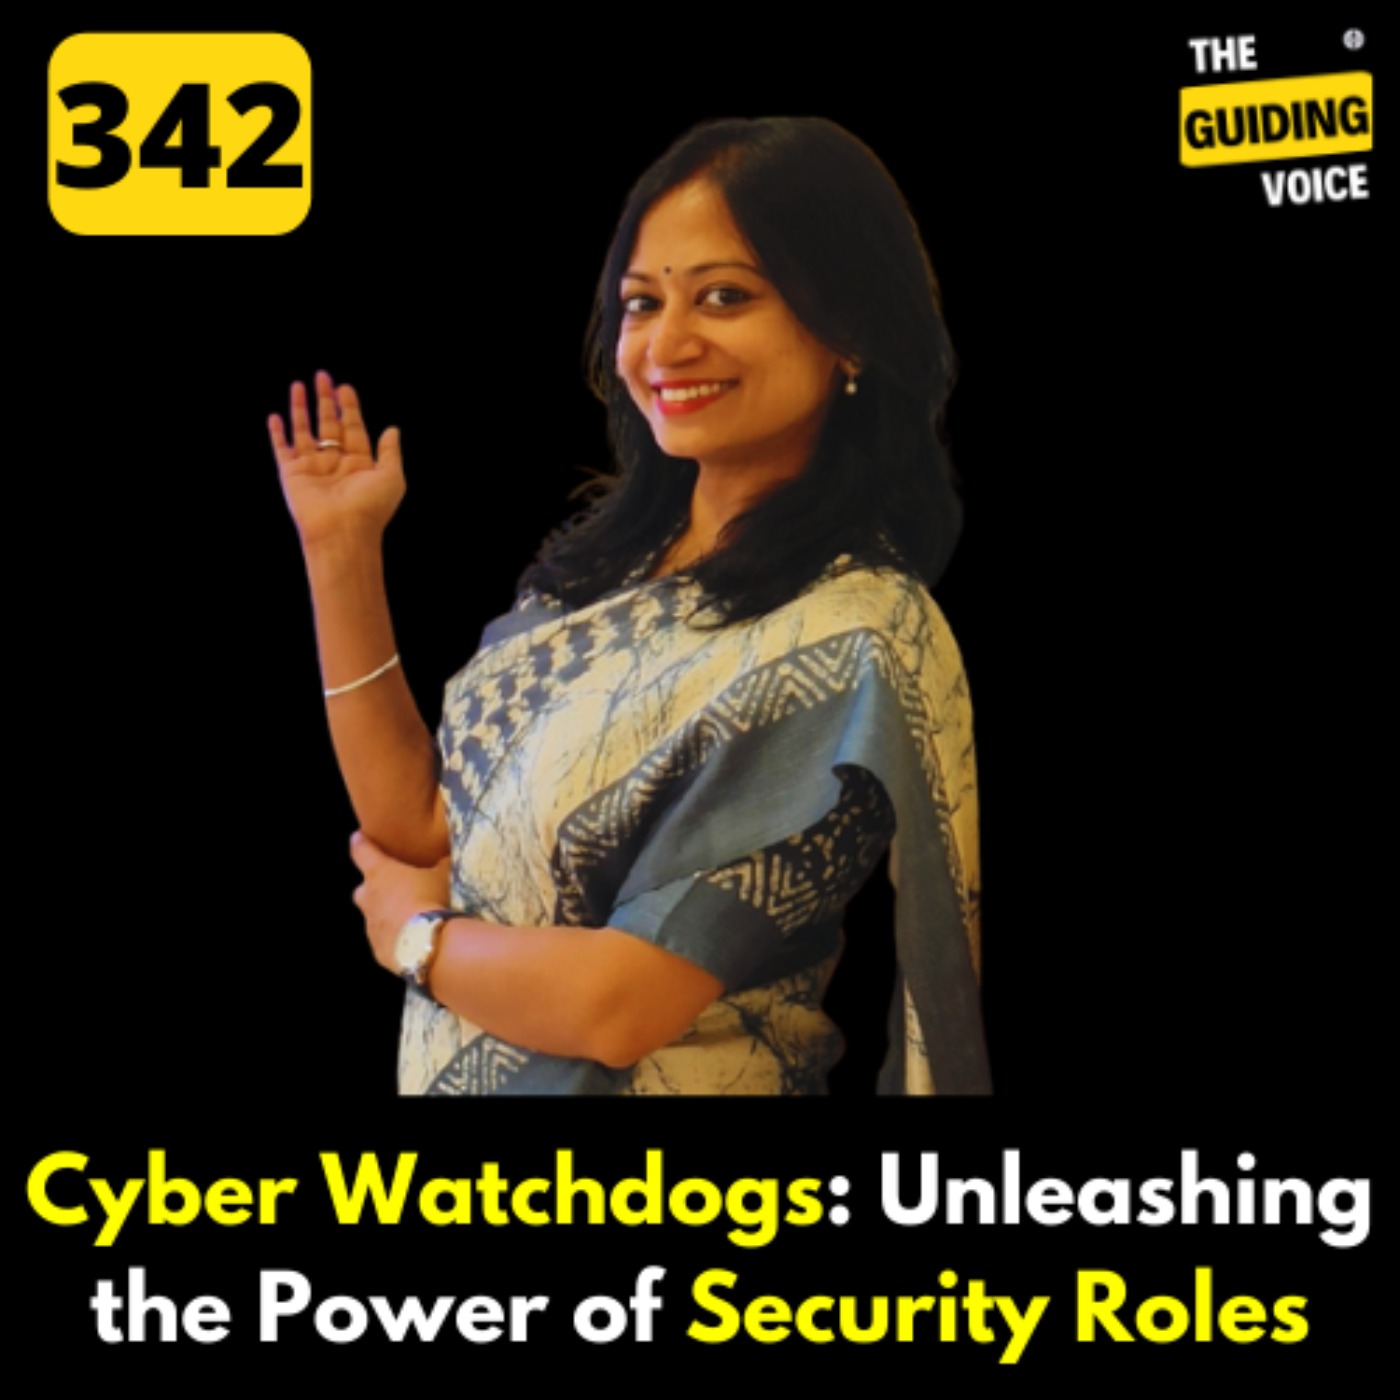 Cyber Watchdogs: Unleashing the roles and careers in IT Security | Rashmi Sarma | #TGV342